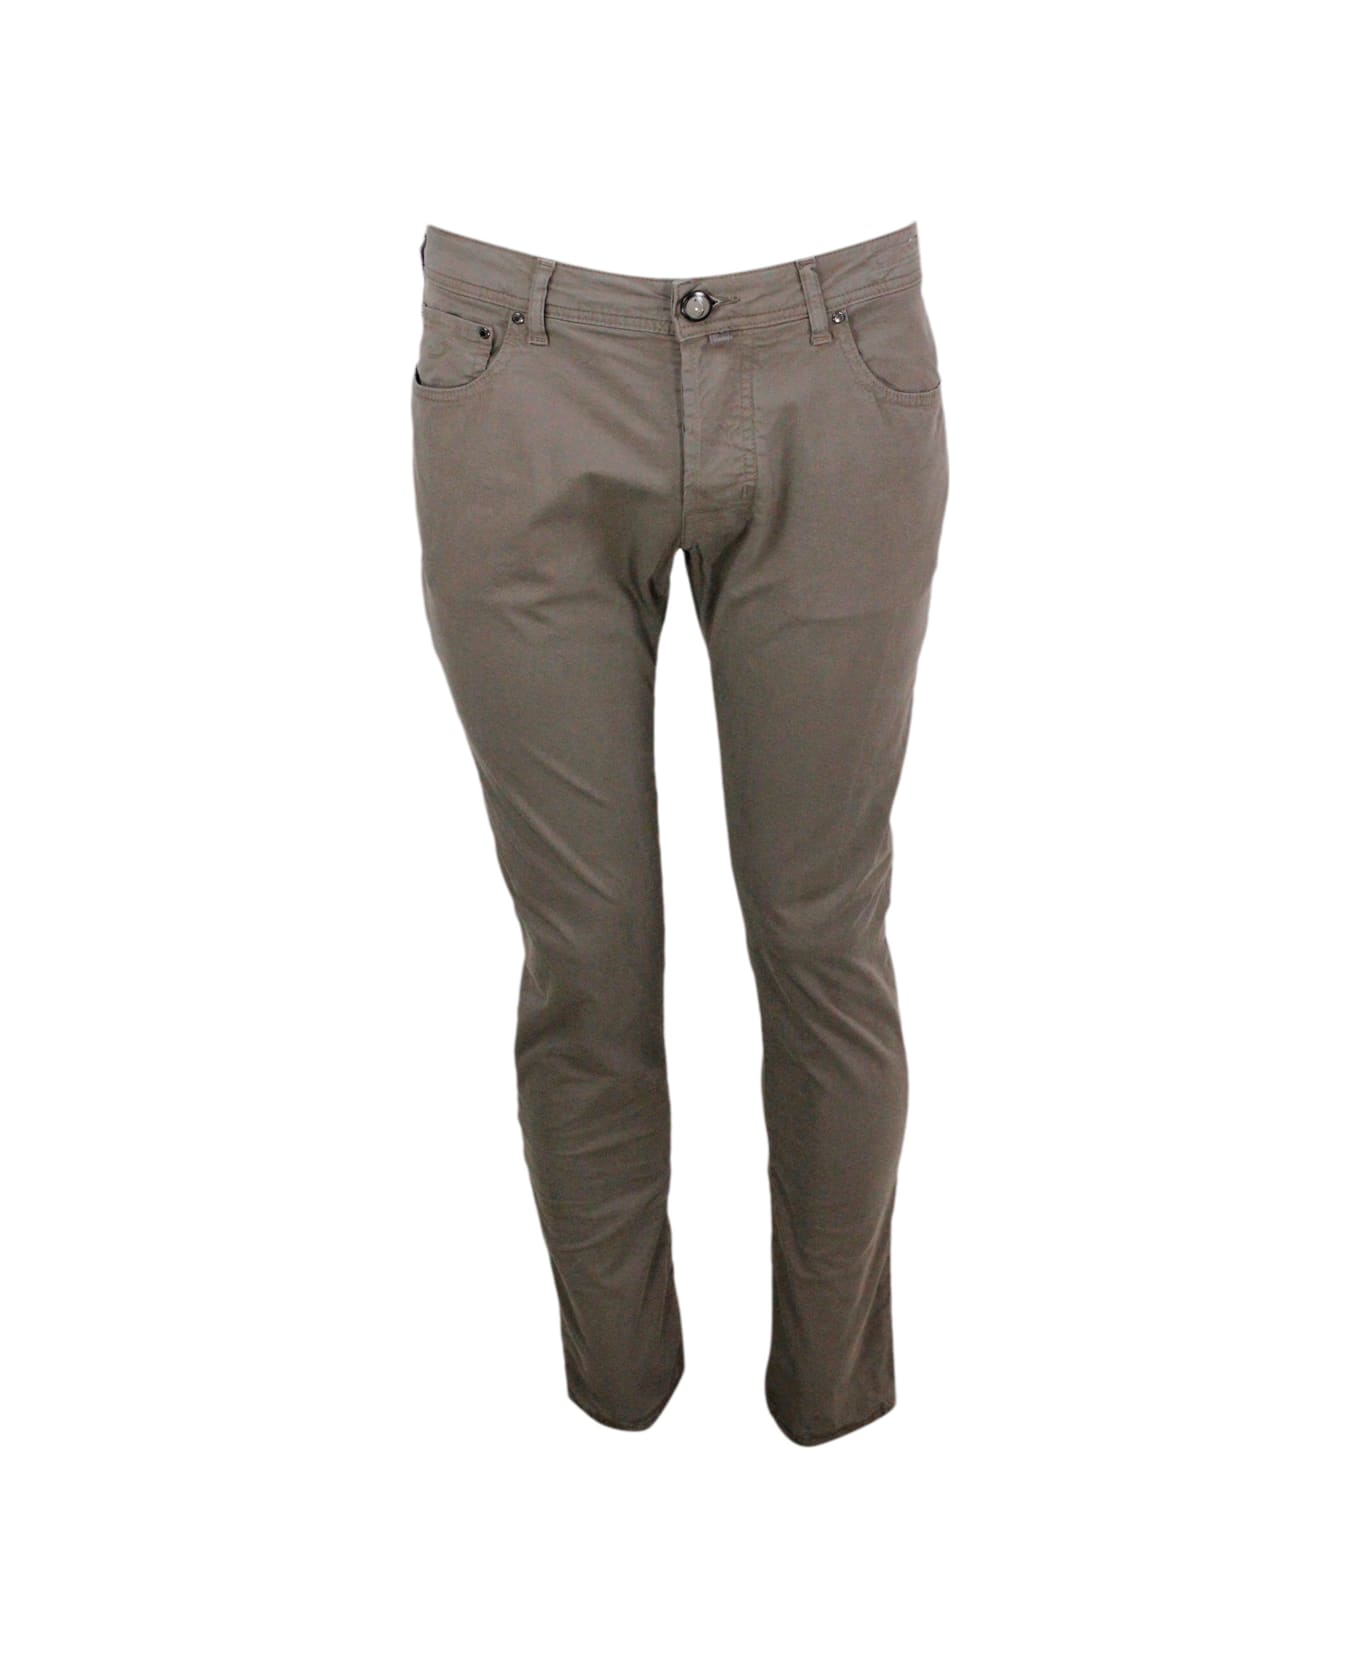 Jacob Cohen Bard J688 Luxury Edition Trousers In Soft Stretch Cotton With 5 Pockets With Closure Buttons And Lacquered Button And Pony Skin Tag With Logo - Taupe ボトムス